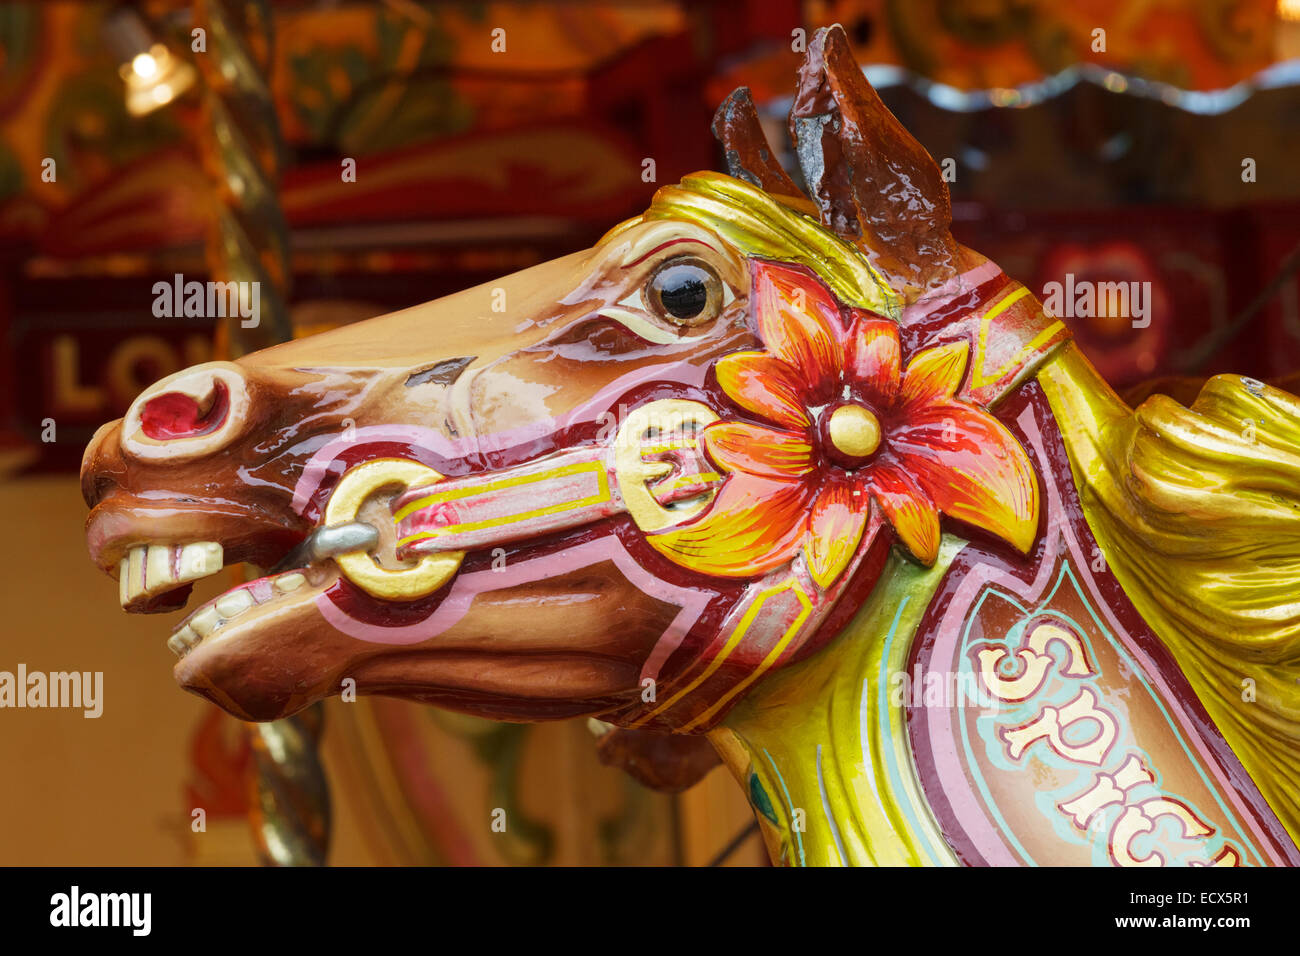 A shiny wooden head of a horse on a vintage carousel Stock Photo